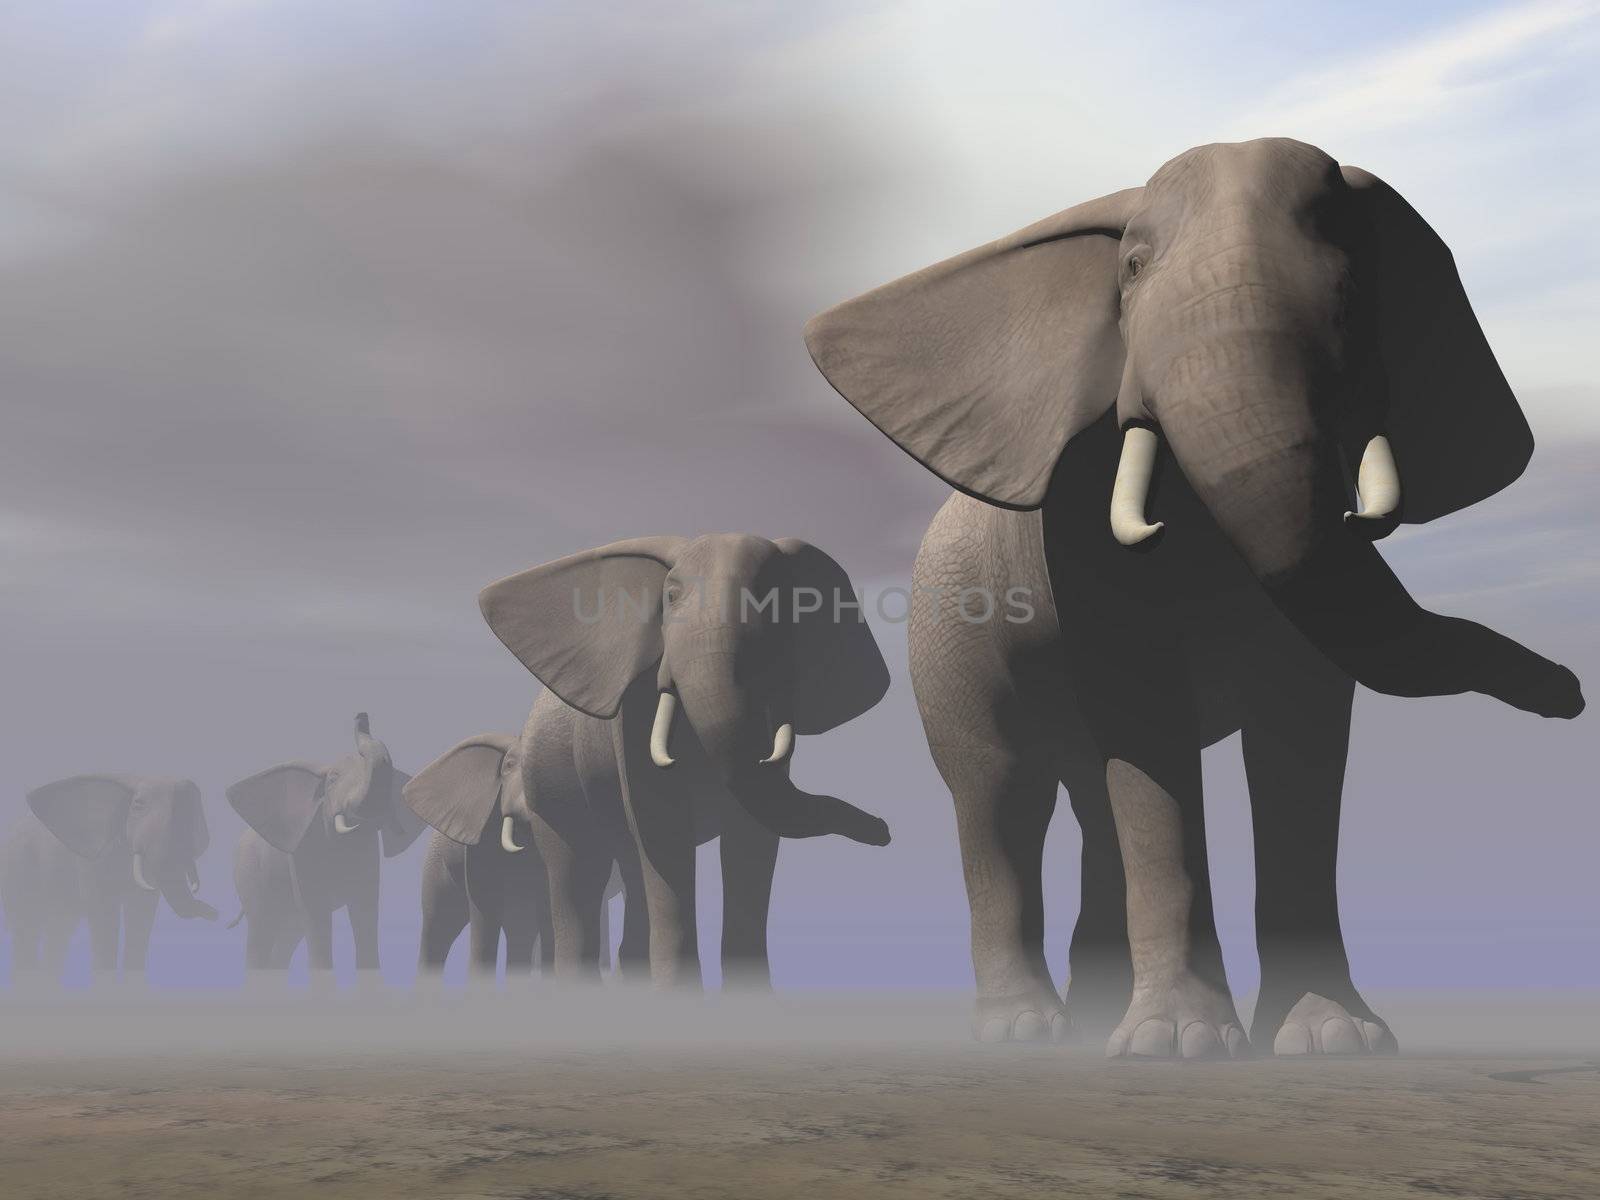 Many elephants walking in a row in the desert by grey hazy and cloudy day